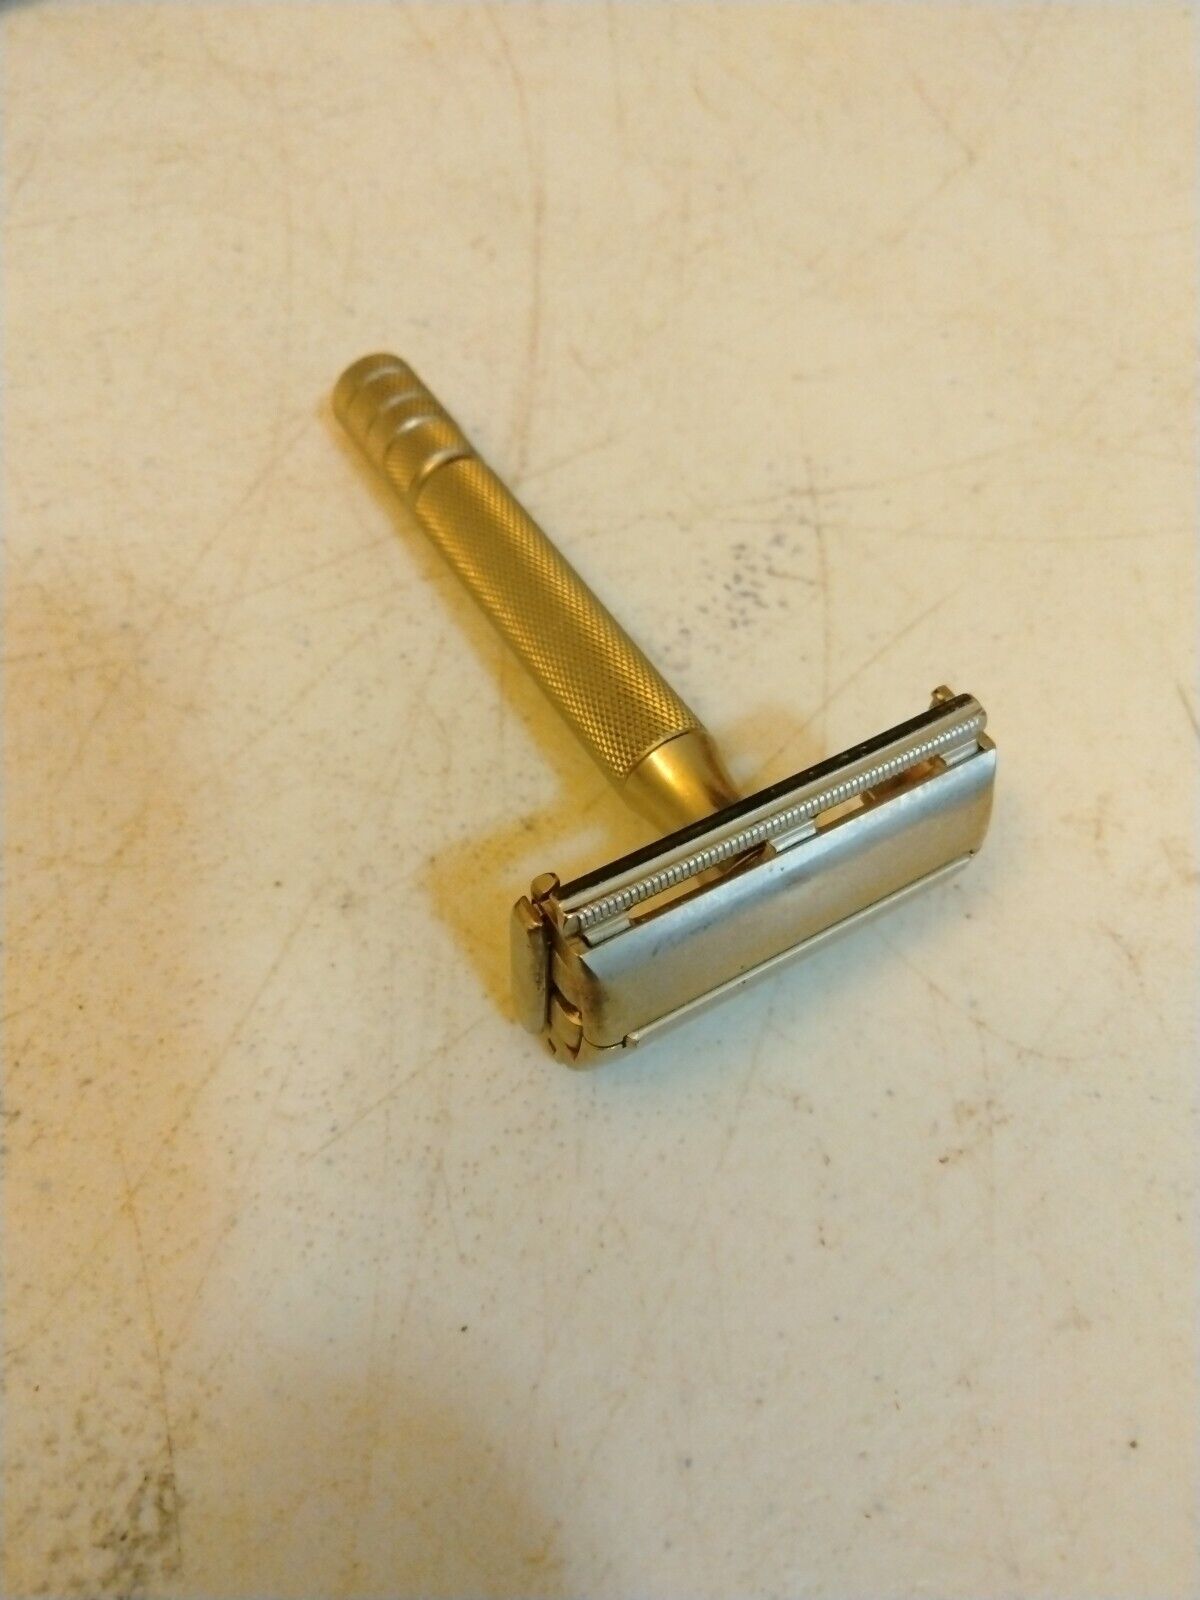 Vintage Gillete Men\'s Safety Razor Made in USA Beard Care Barber Grooming Tool